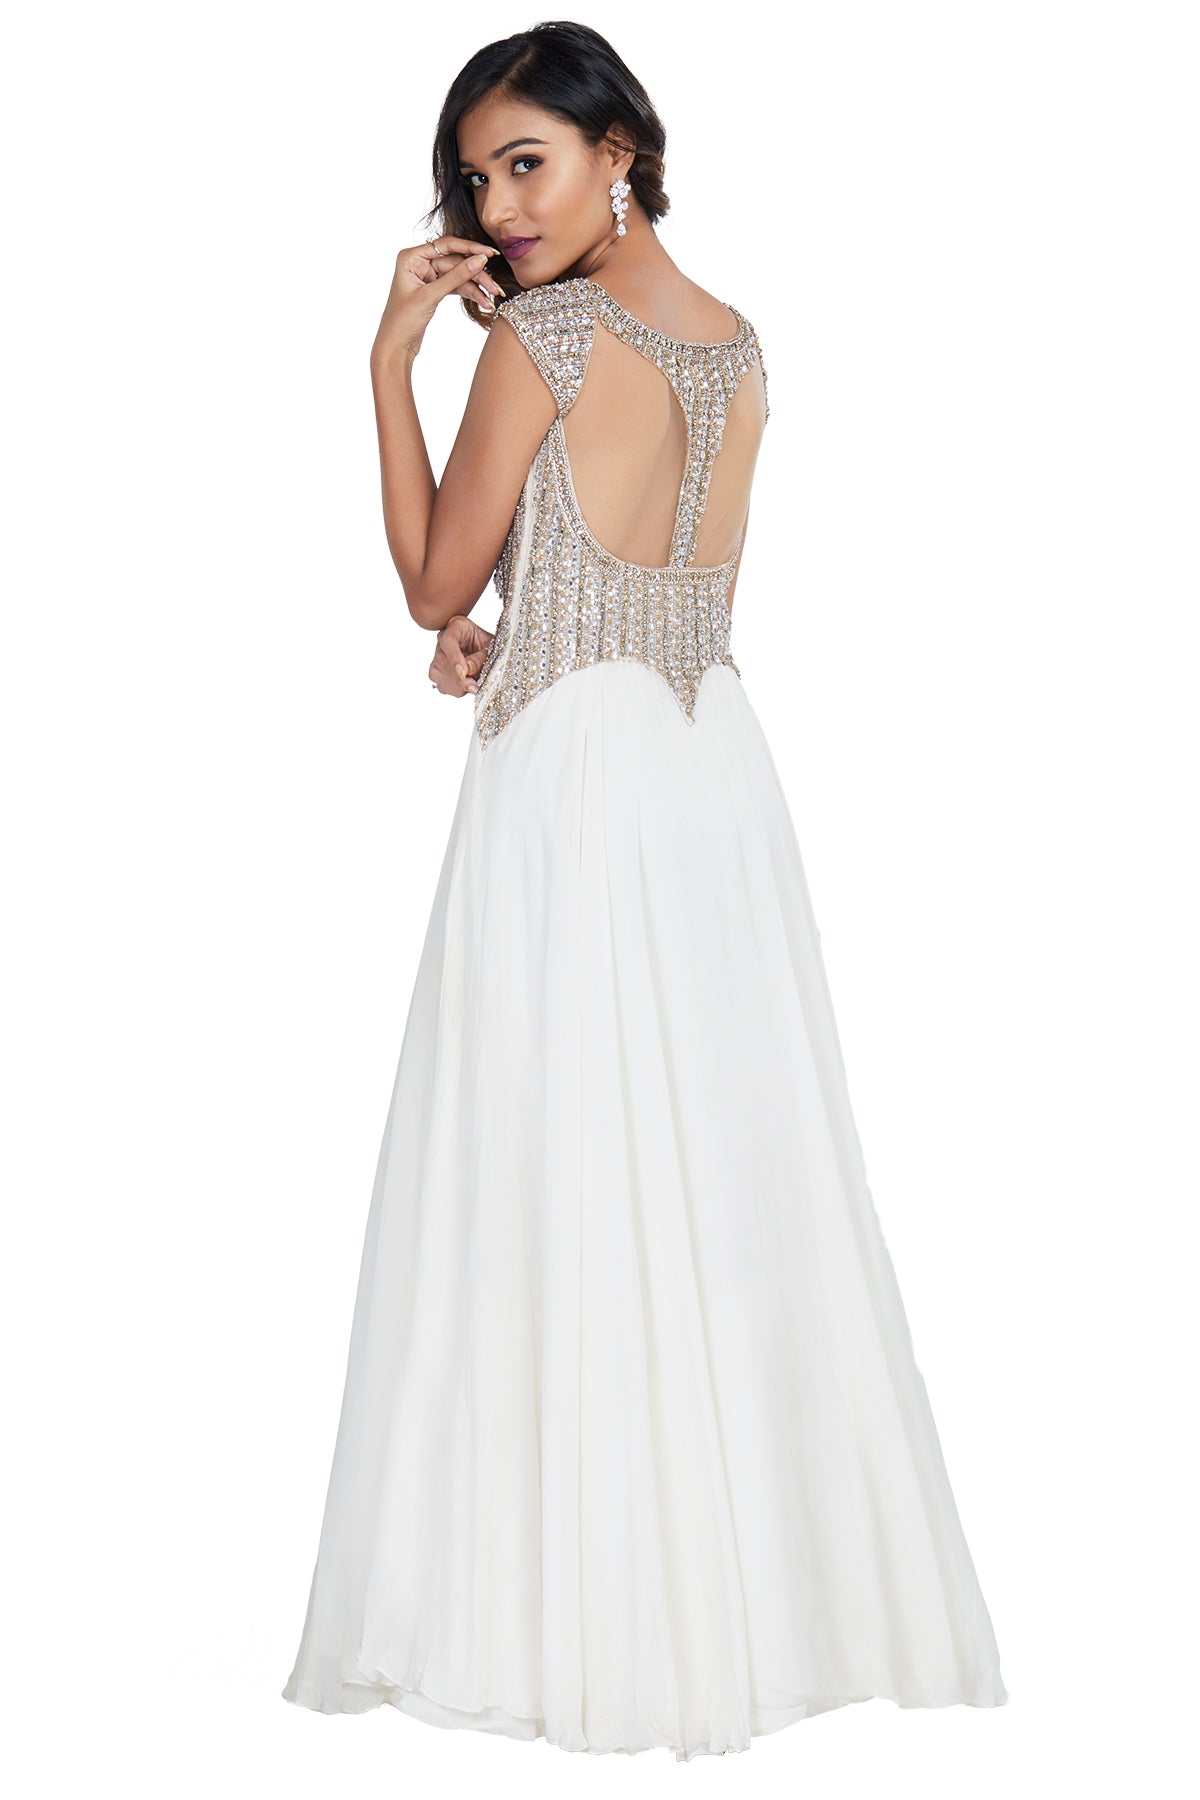 Embellished white gown